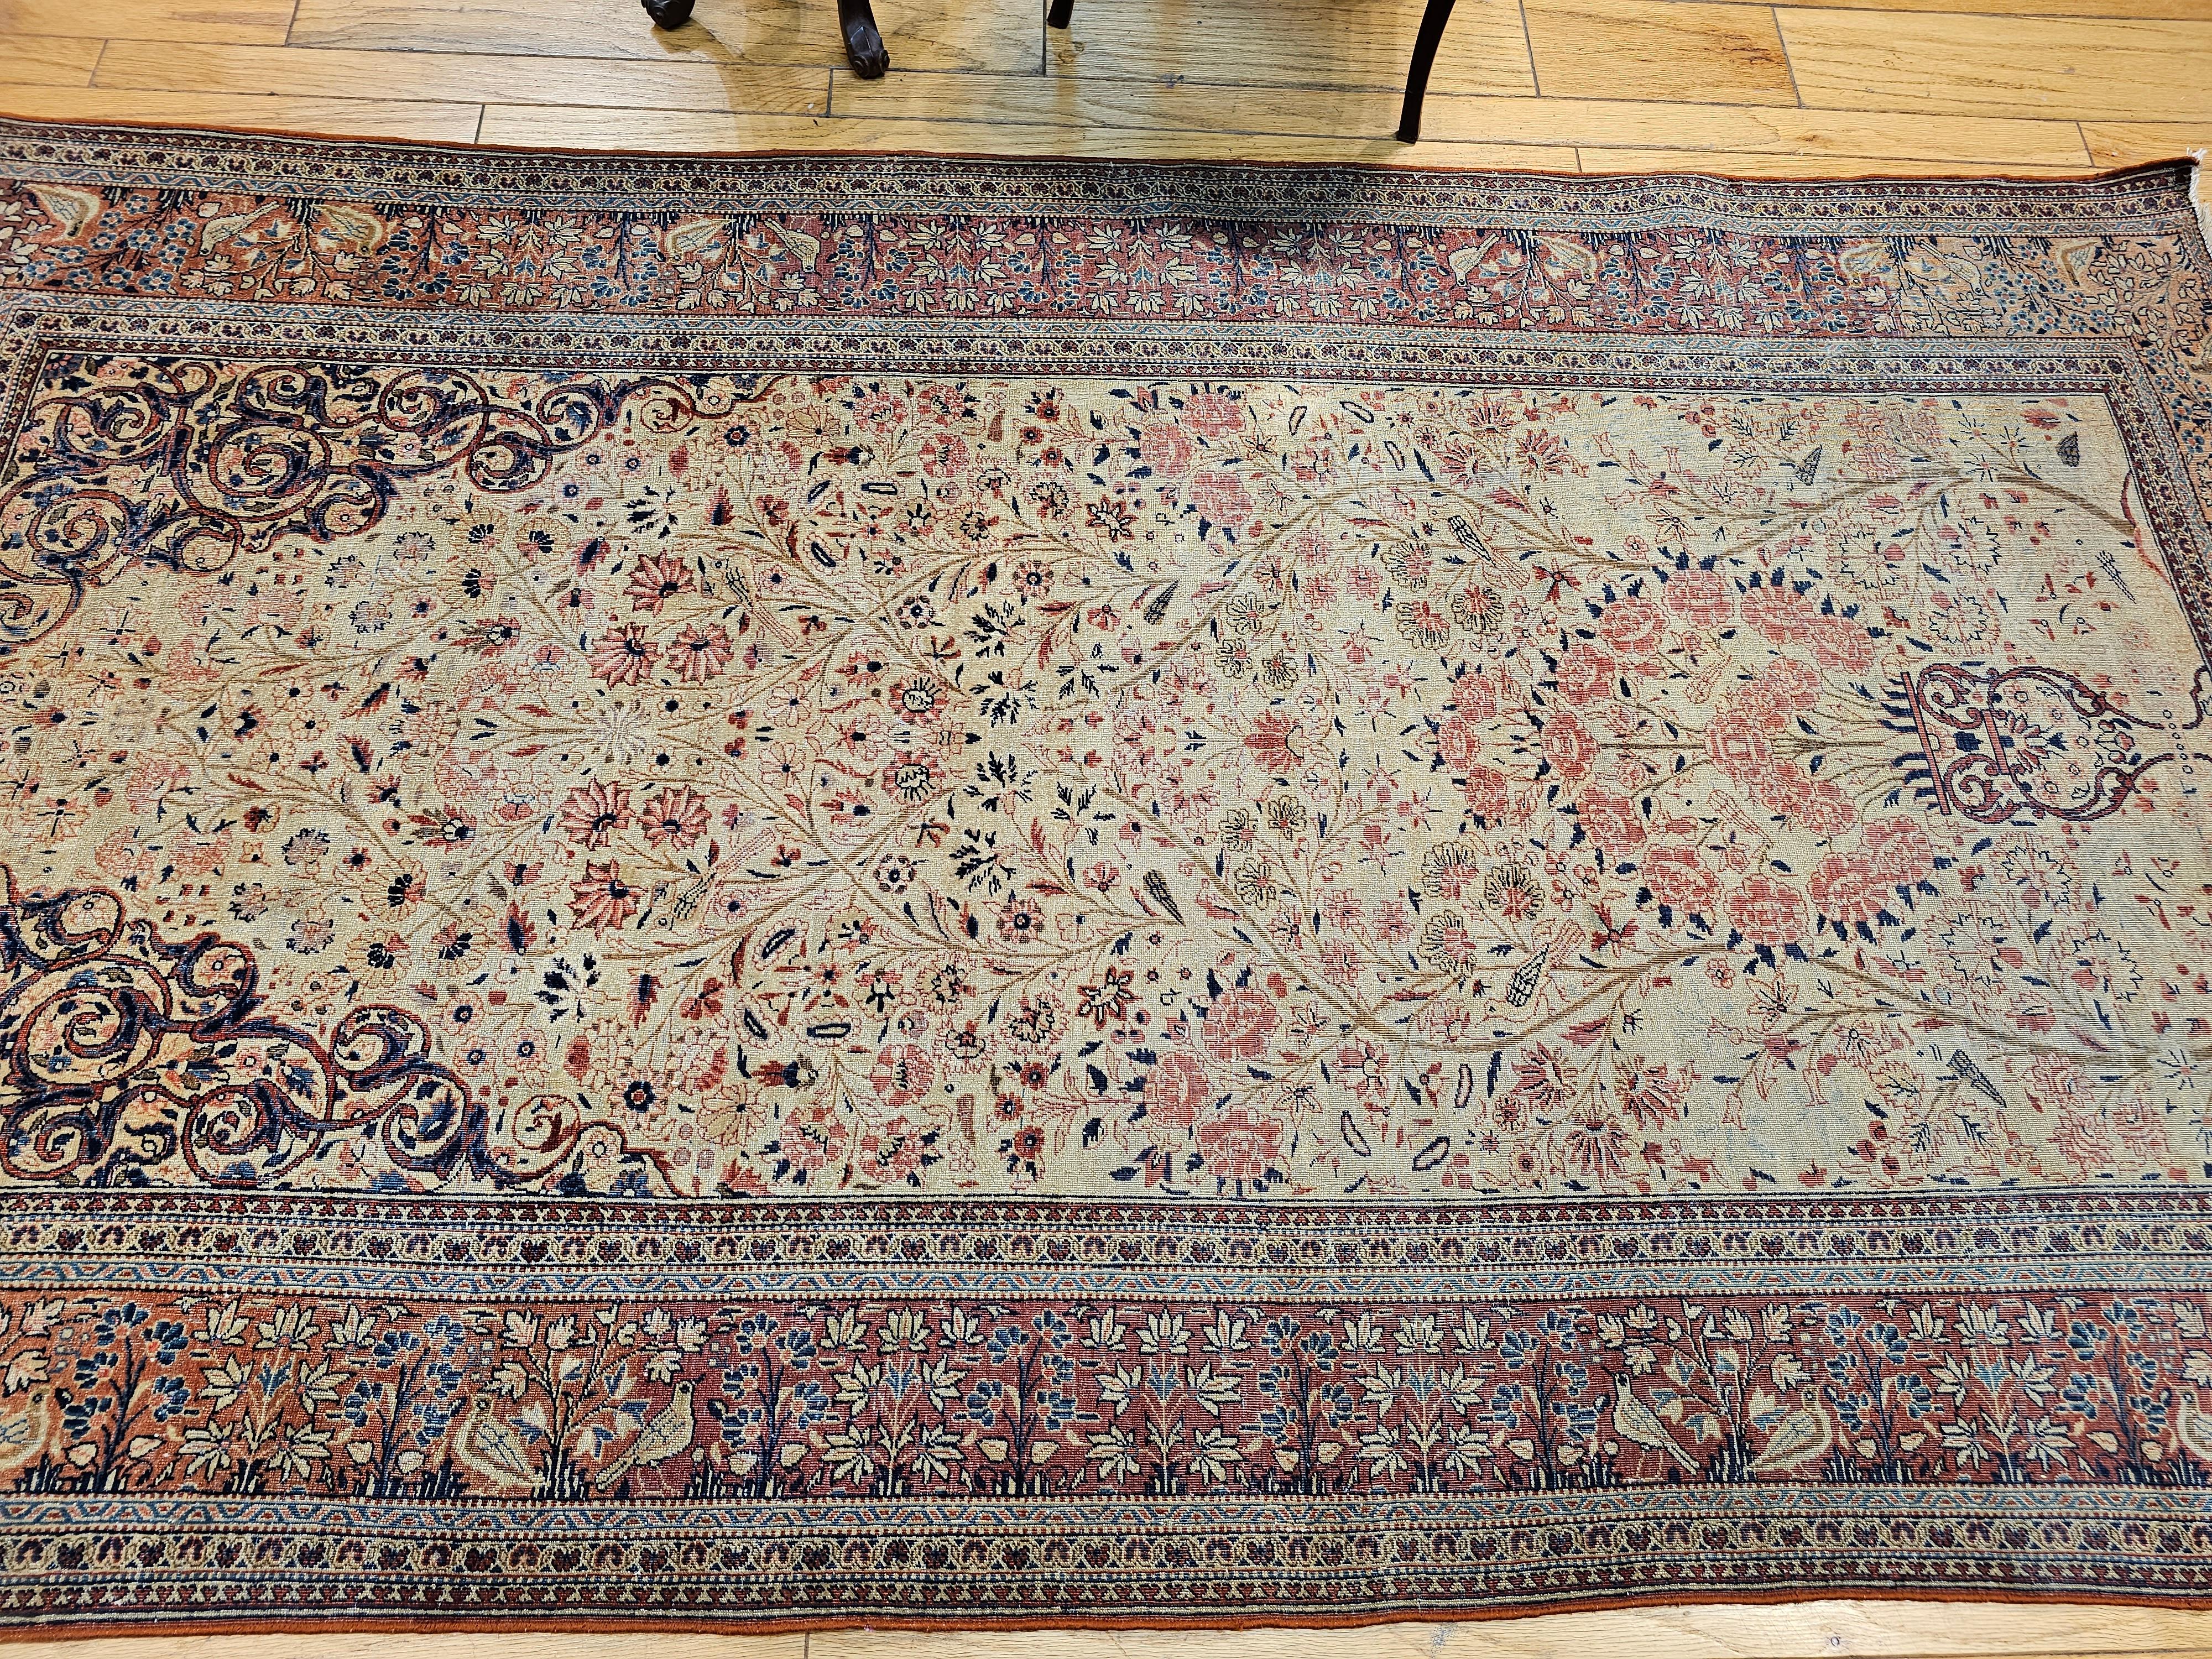 19th Century Persian Kashan “Tree of Life” Vase Rug in Ivory, Brick Red, Navy For Sale 11